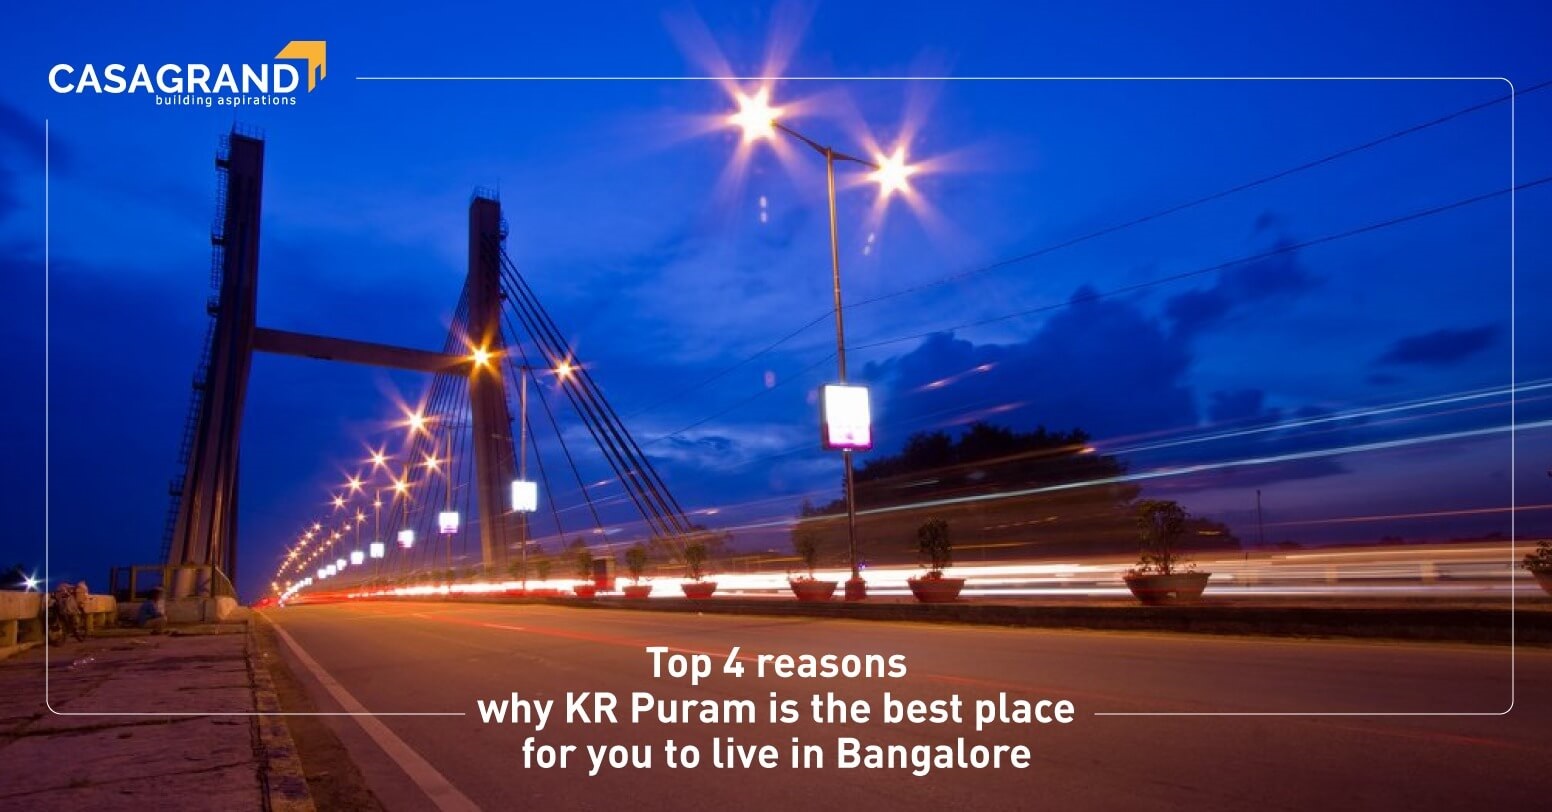 Top 4 Reasons Why KR Puram is the Best Place for You to Live in Bangalore